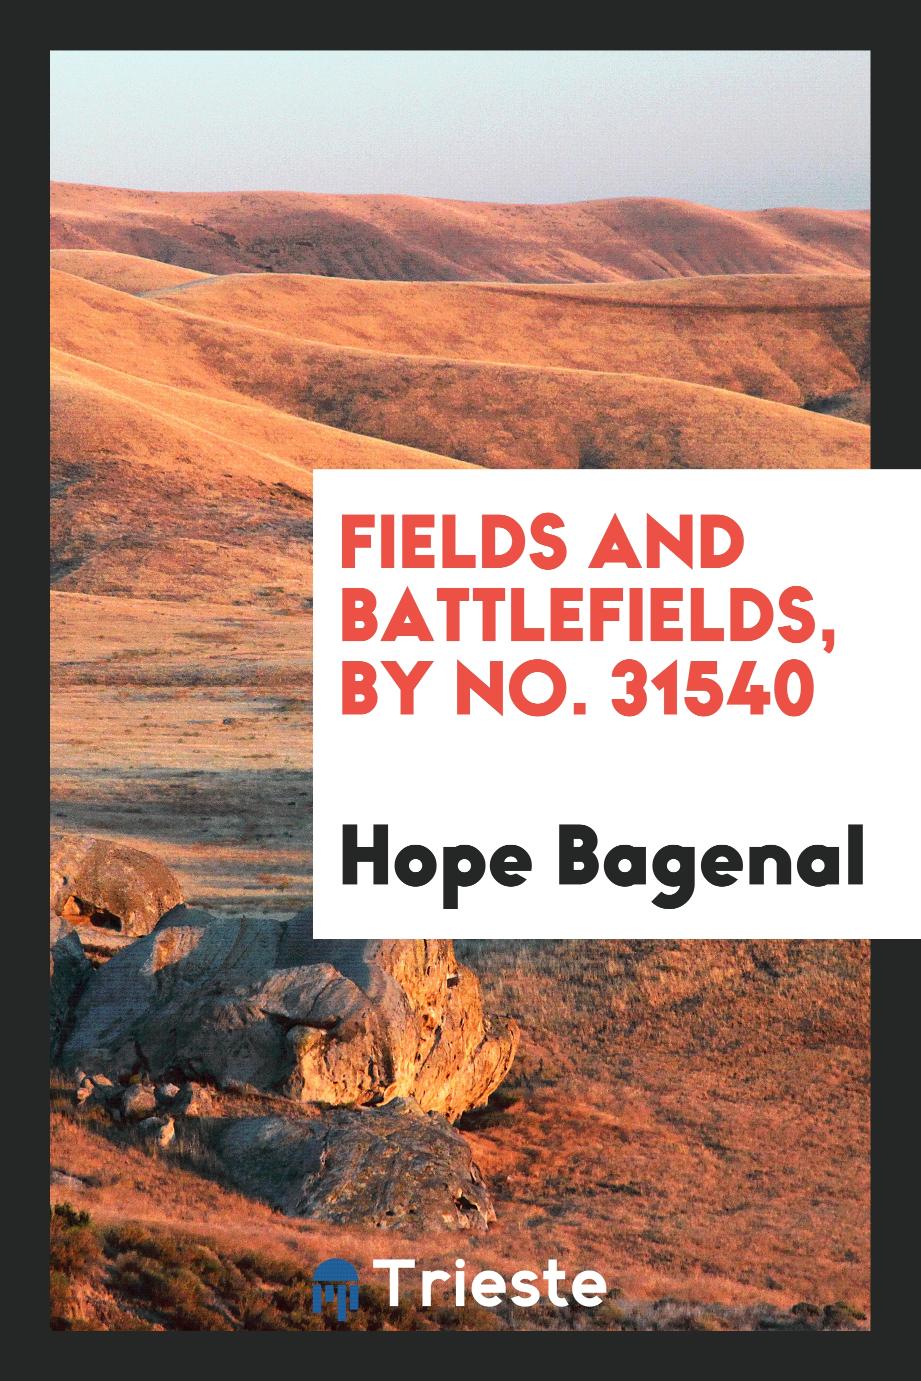 Fields and battlefields, by No. 31540